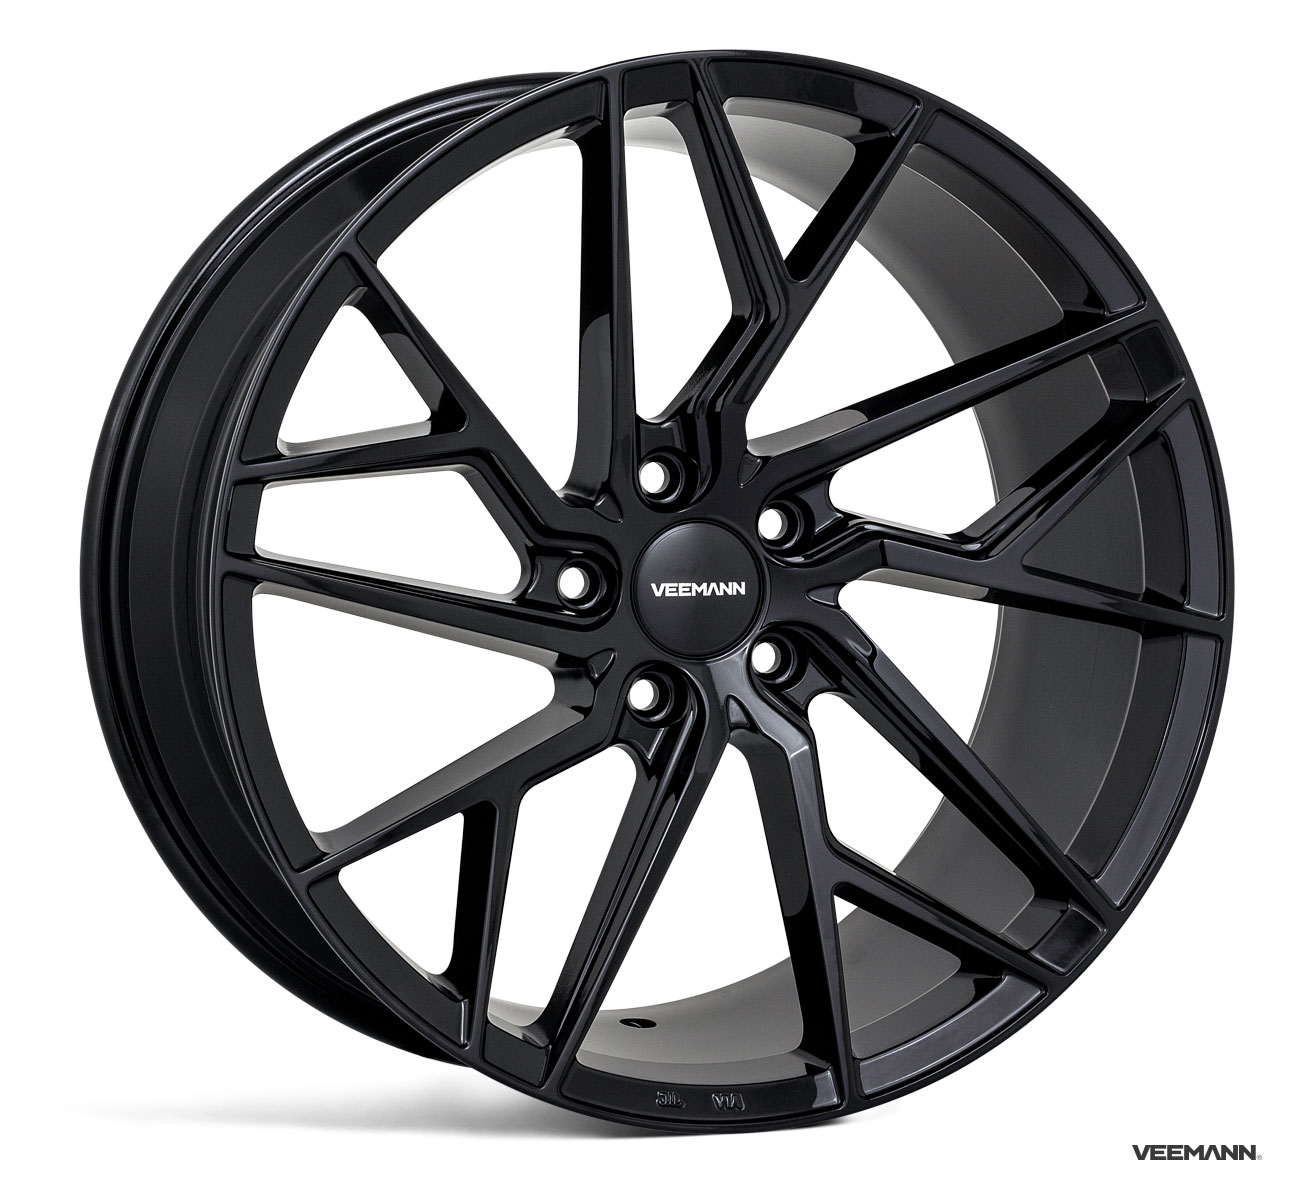 NEW 18" VEEMANN V-FS44 ALLOY WHEELS IN GLOSS BLACK WITH WIDER 9" REARS